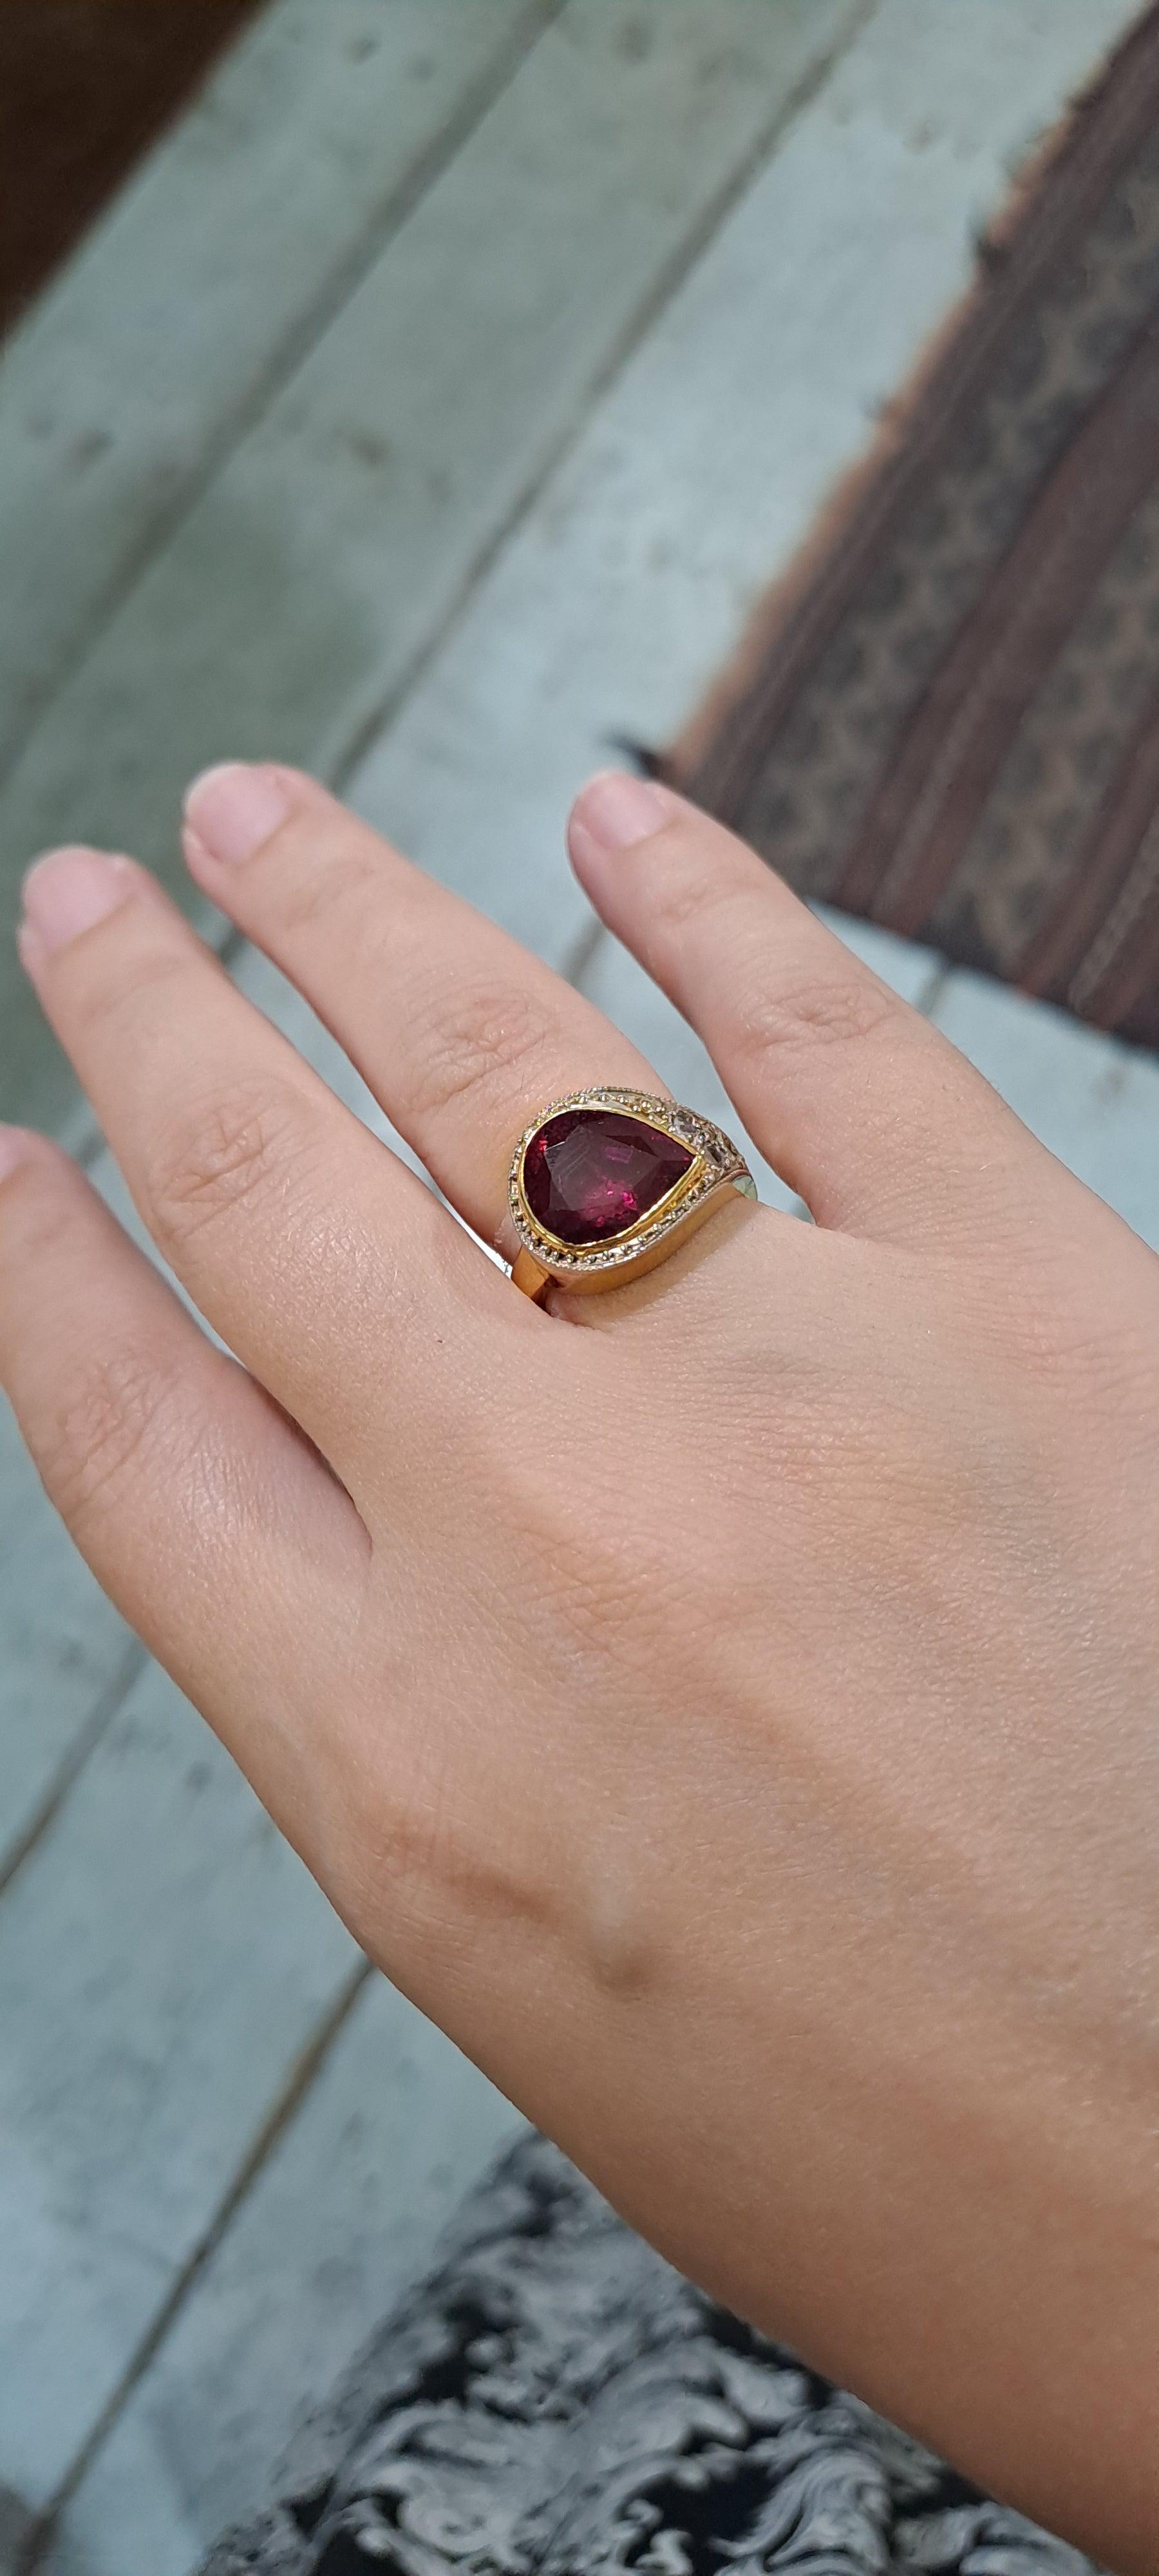 Ring in Gold 18k with amethyst & diamonds